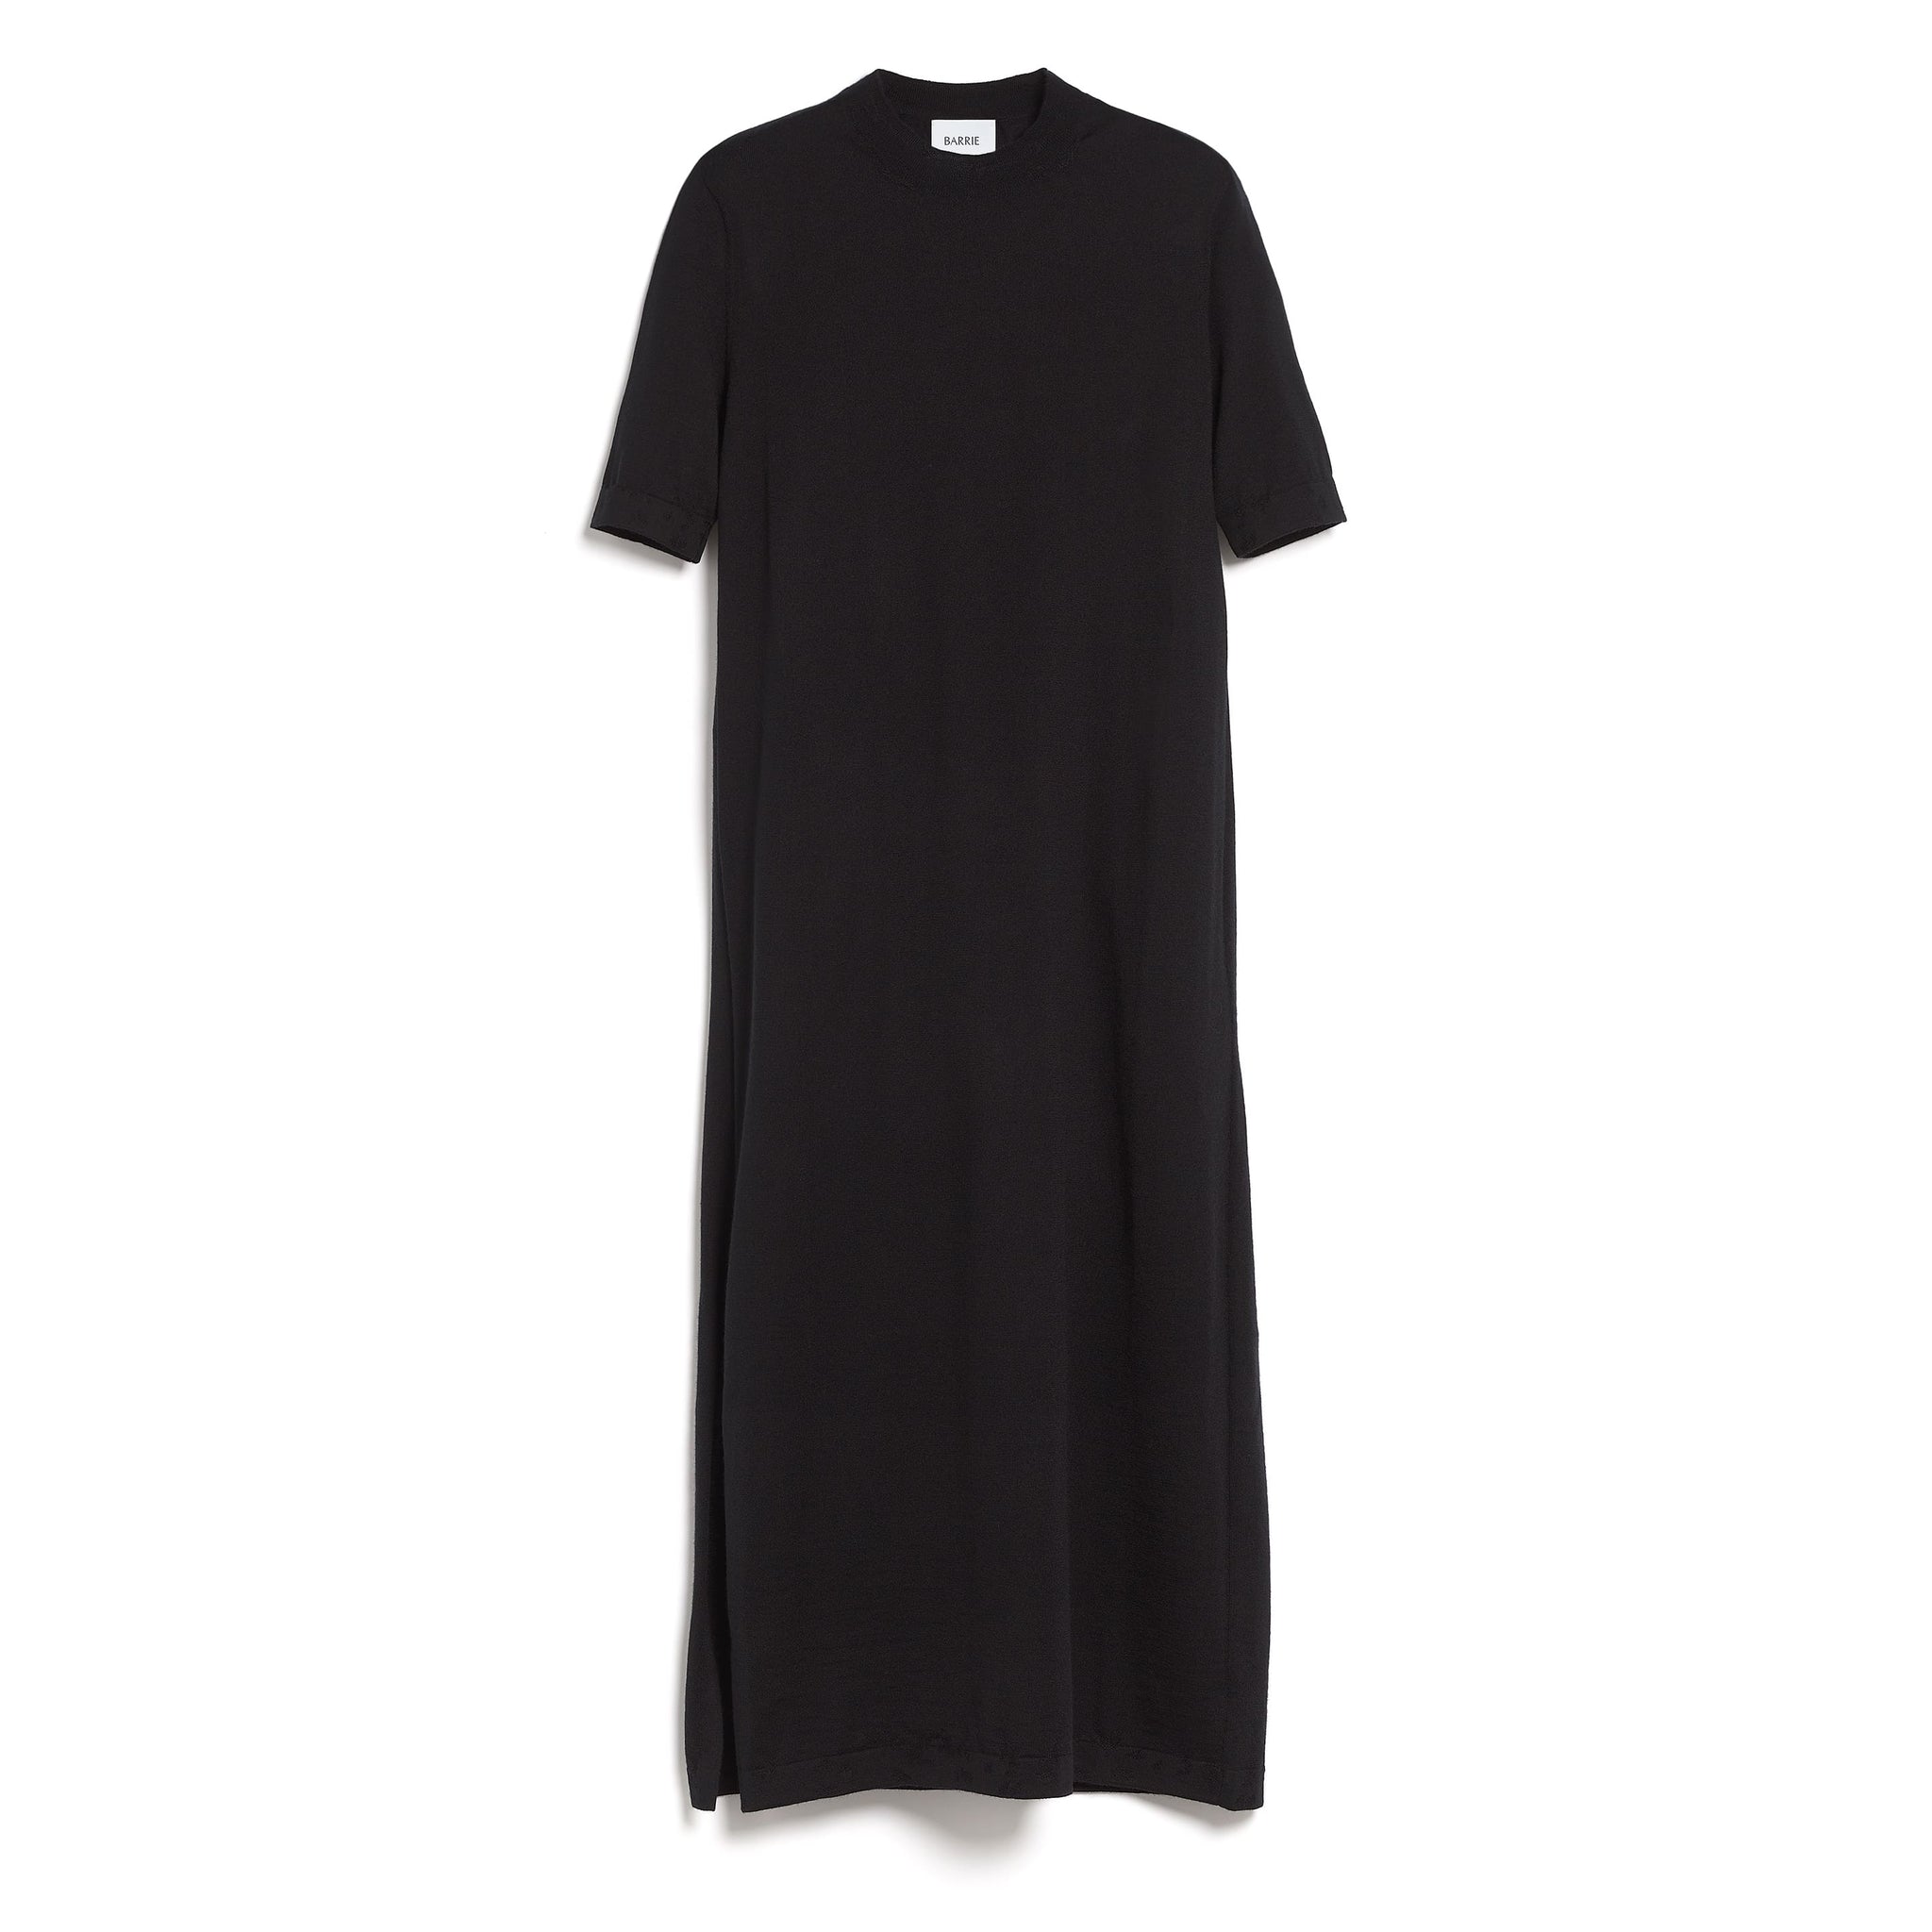 Cashmere dresses and skirts – Barrie.com